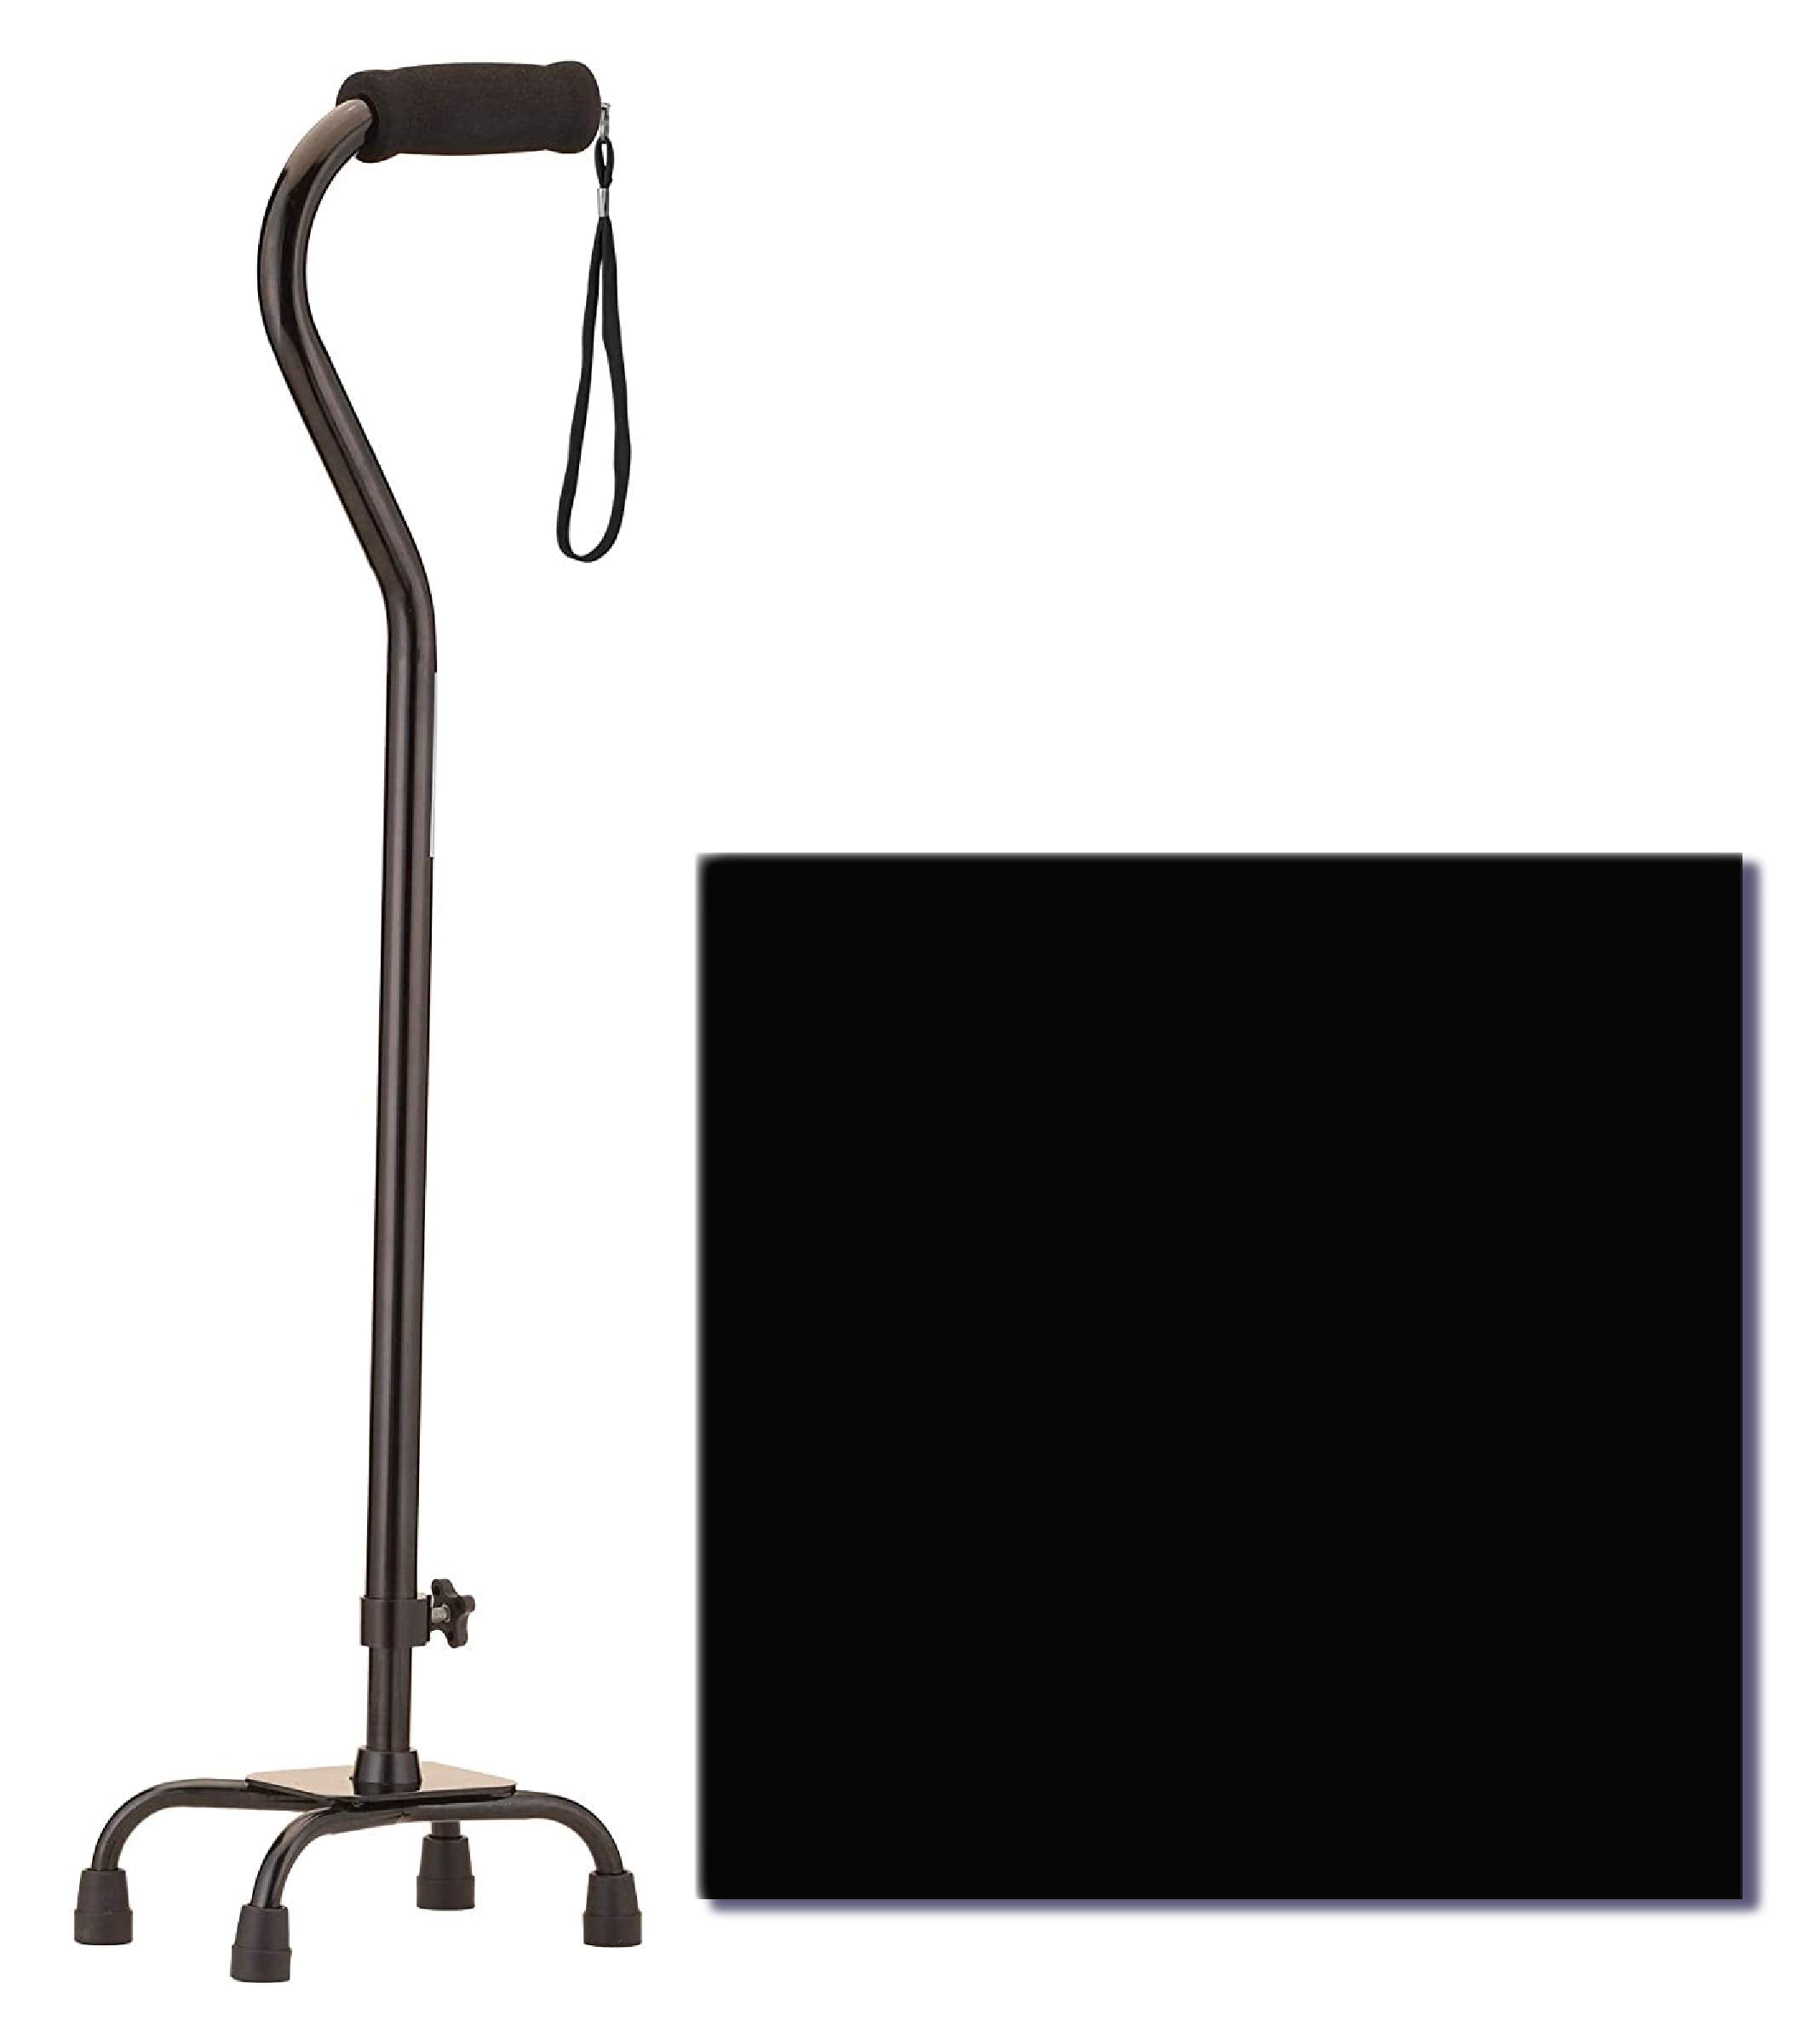 NOVA Quad Cane, Lightweight Four Legged Cane with Soft Grip Handle, Height (for users 411 - 64) and Left or Right Adjustable, Black